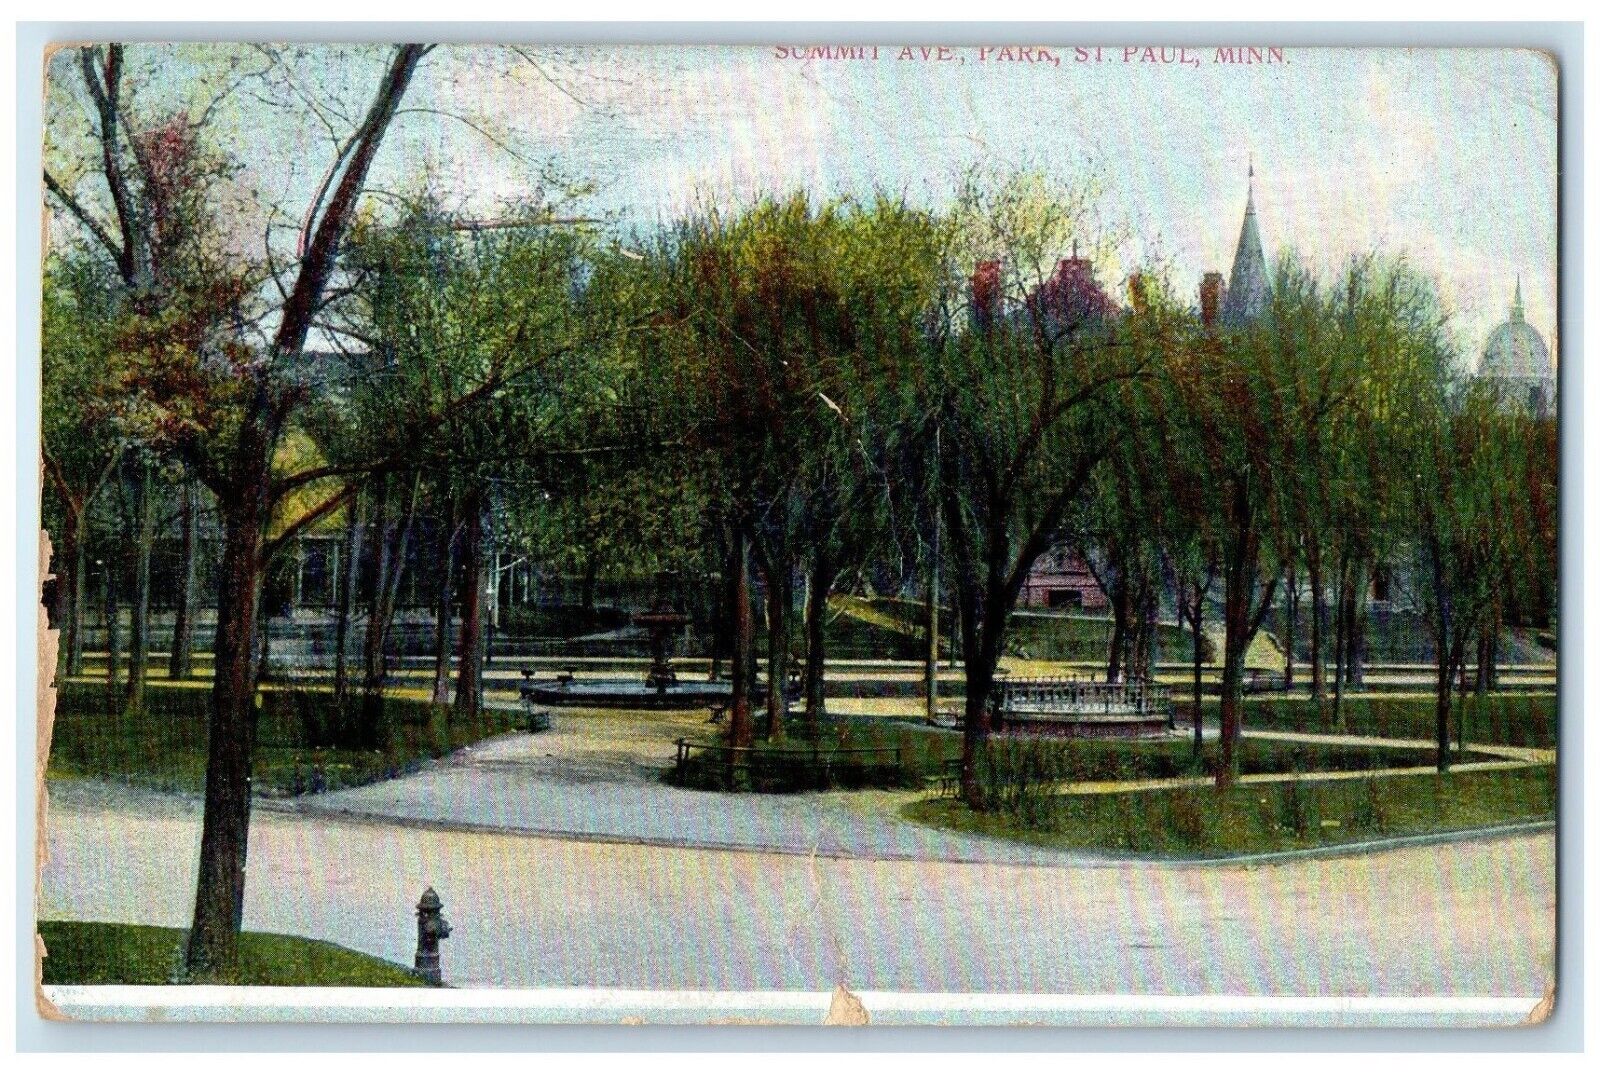 1913 View Of Summit Avenue Park St. Paul Minnesota MN Posted Antique Postcard